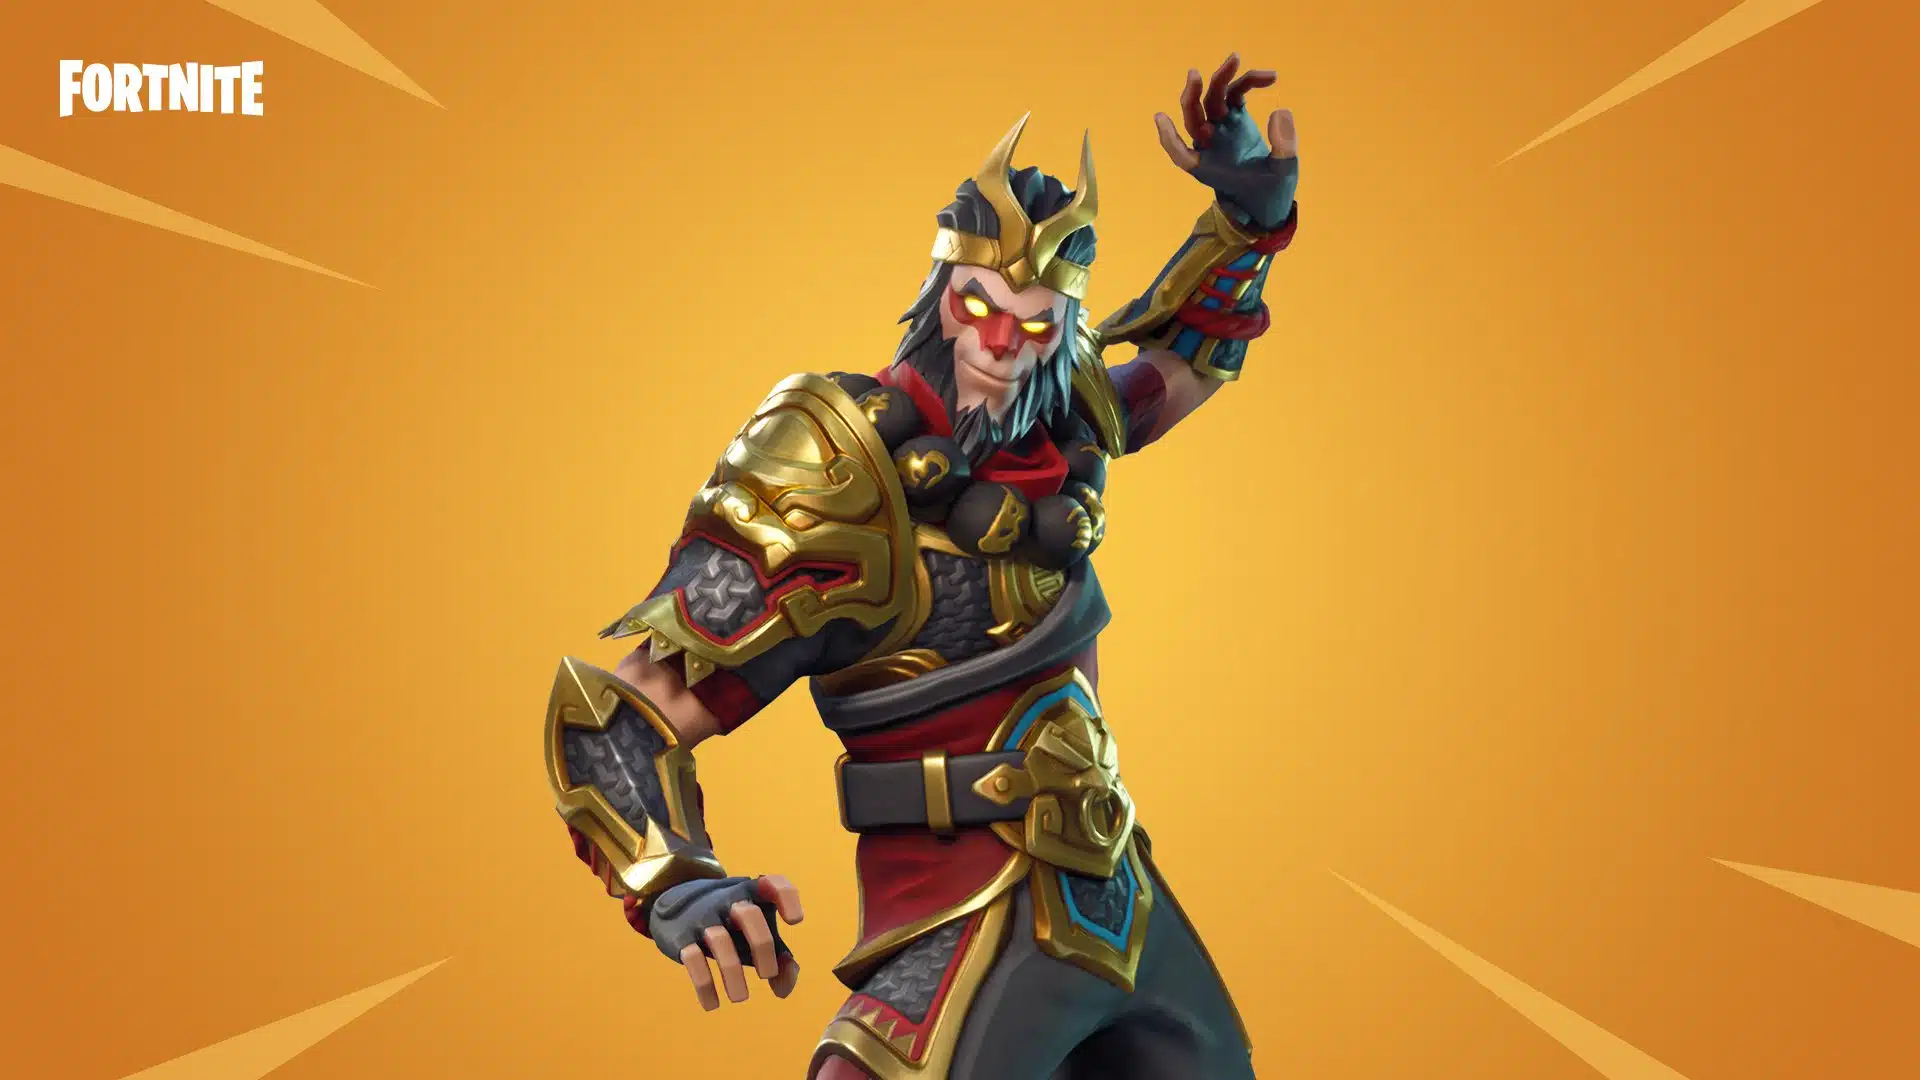 Today's Item Shop in Fortnite - Wukong